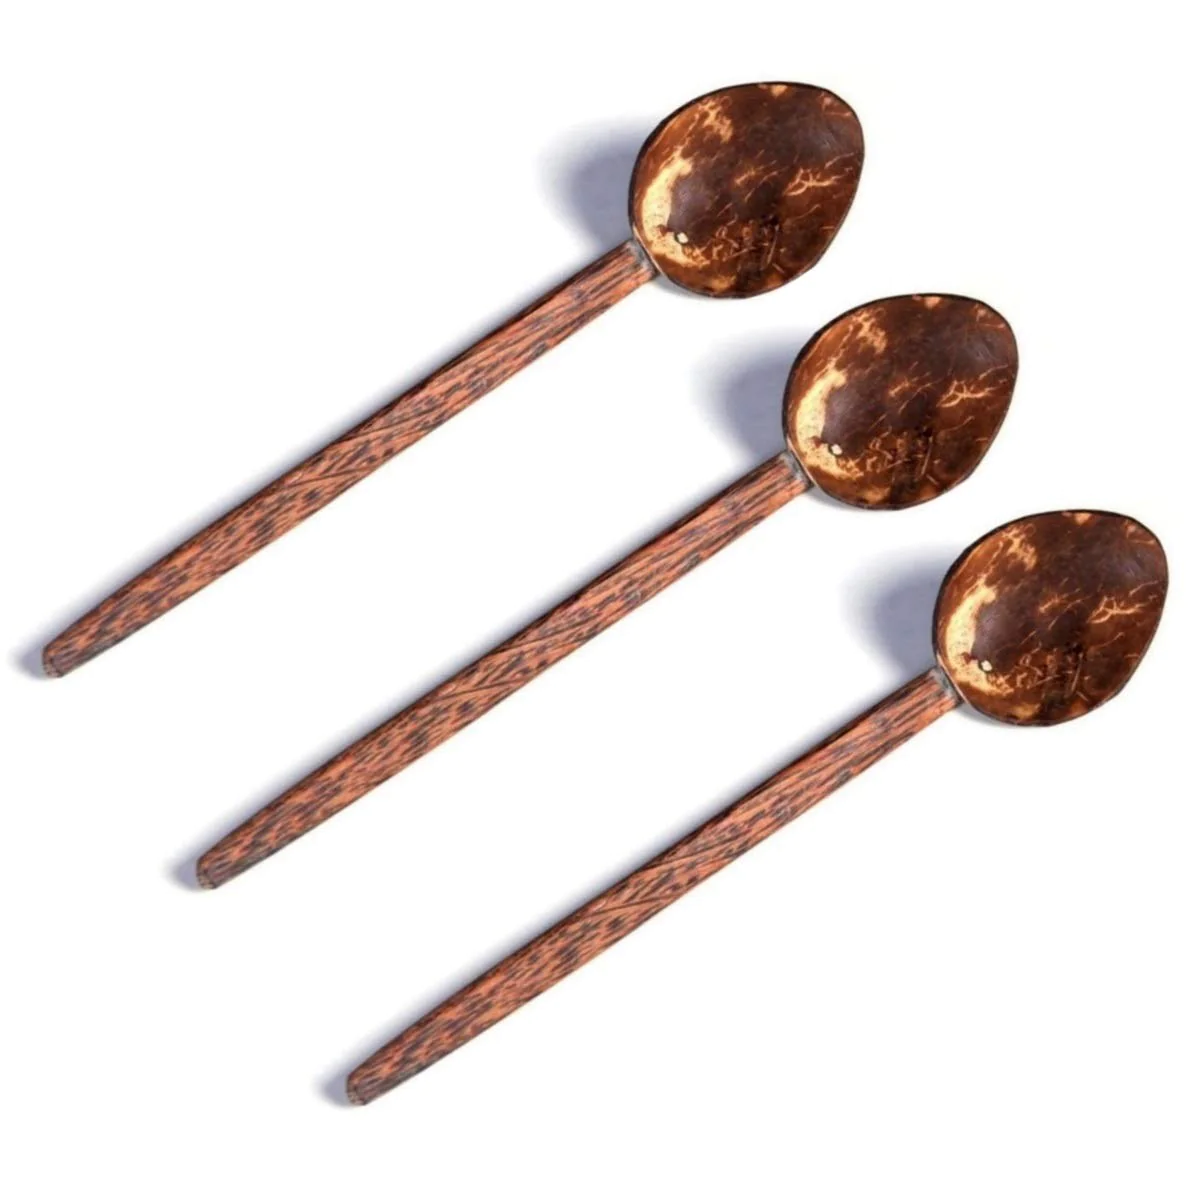 Ecocraft India Coconut Tea Spoon Medium (Pack of 3) – Hand Made – Made from Coconut Shell and Wood